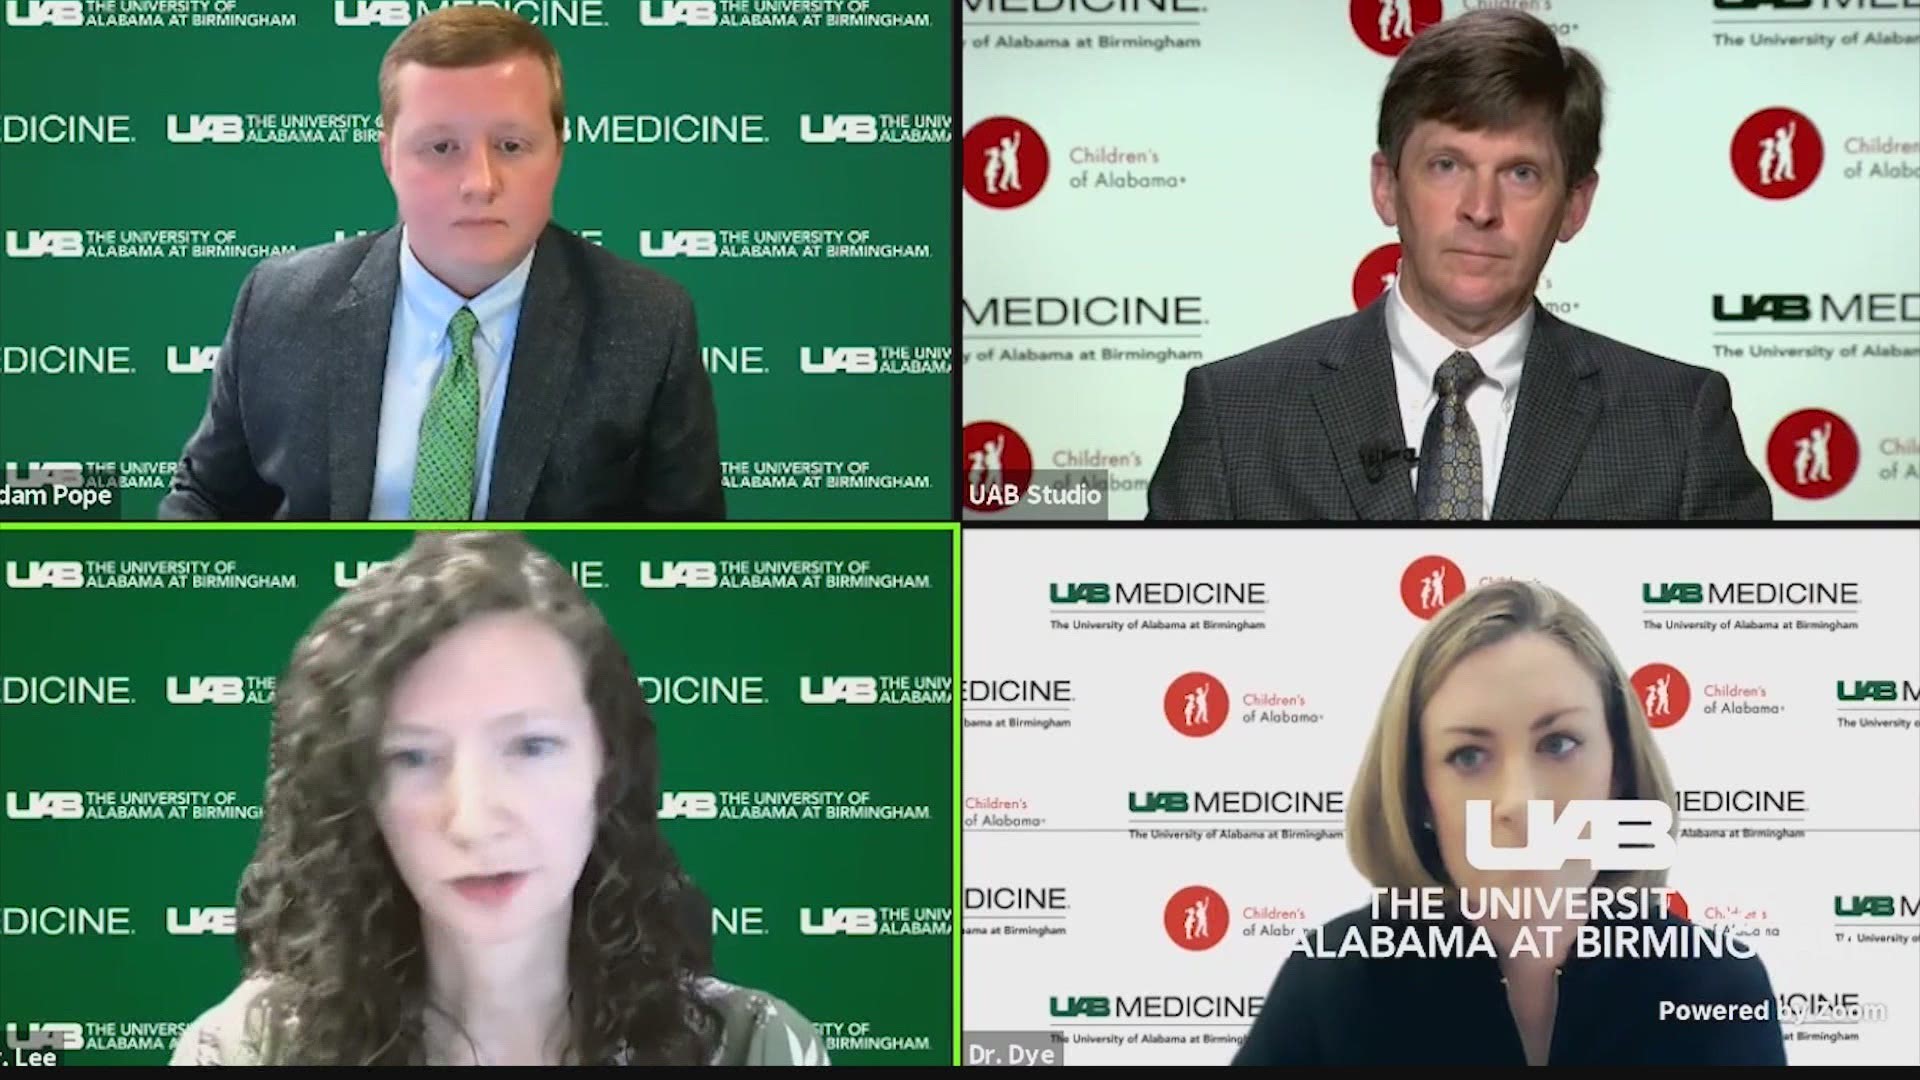 Experts at UAB answered questions during a Facebook Q&A.